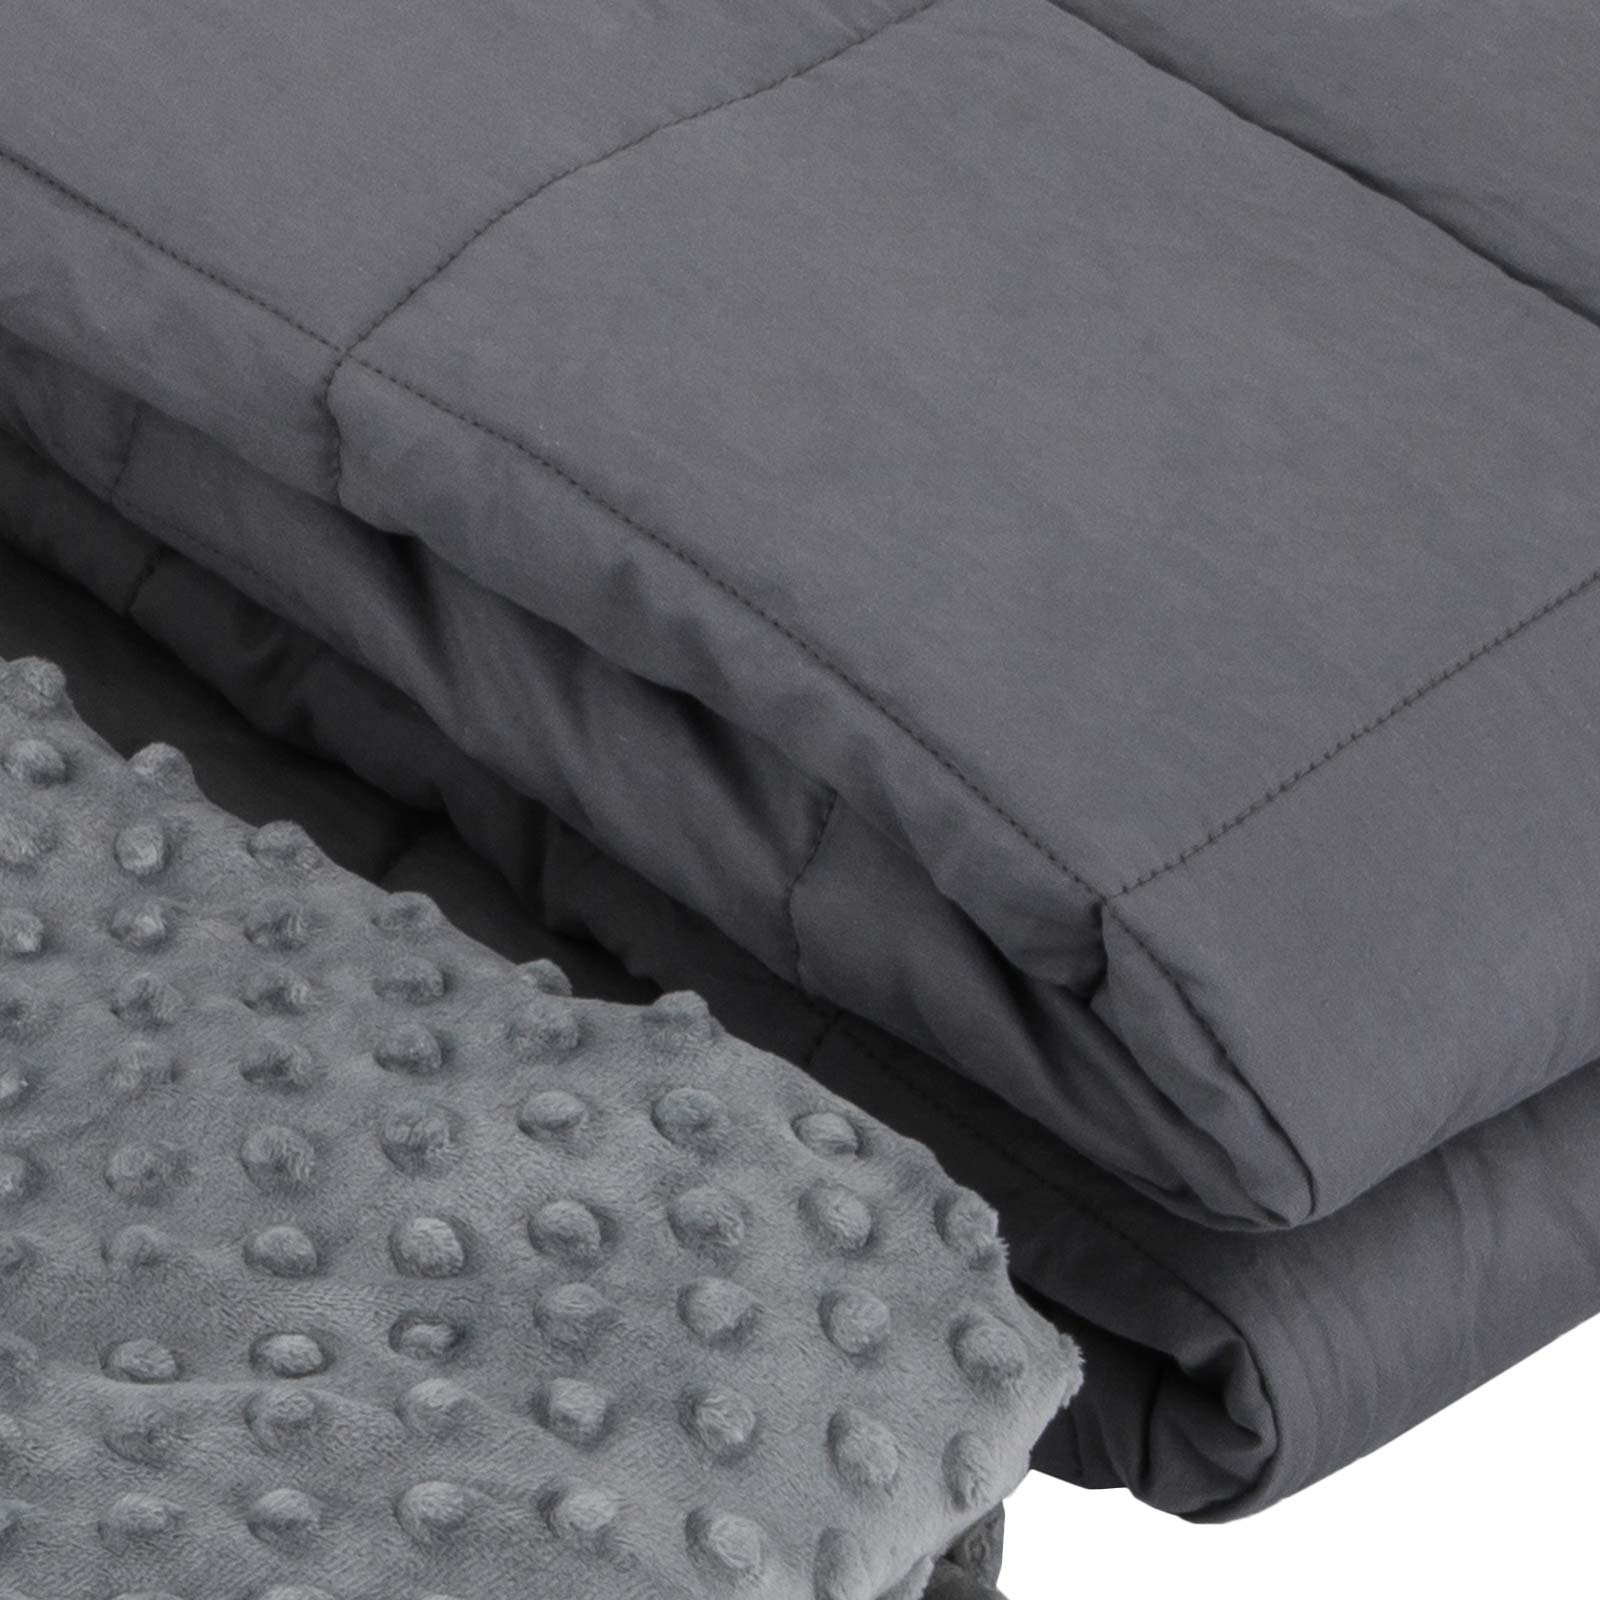 Weighted Blankets Help Sufferers Of Anxiety - Simplemost